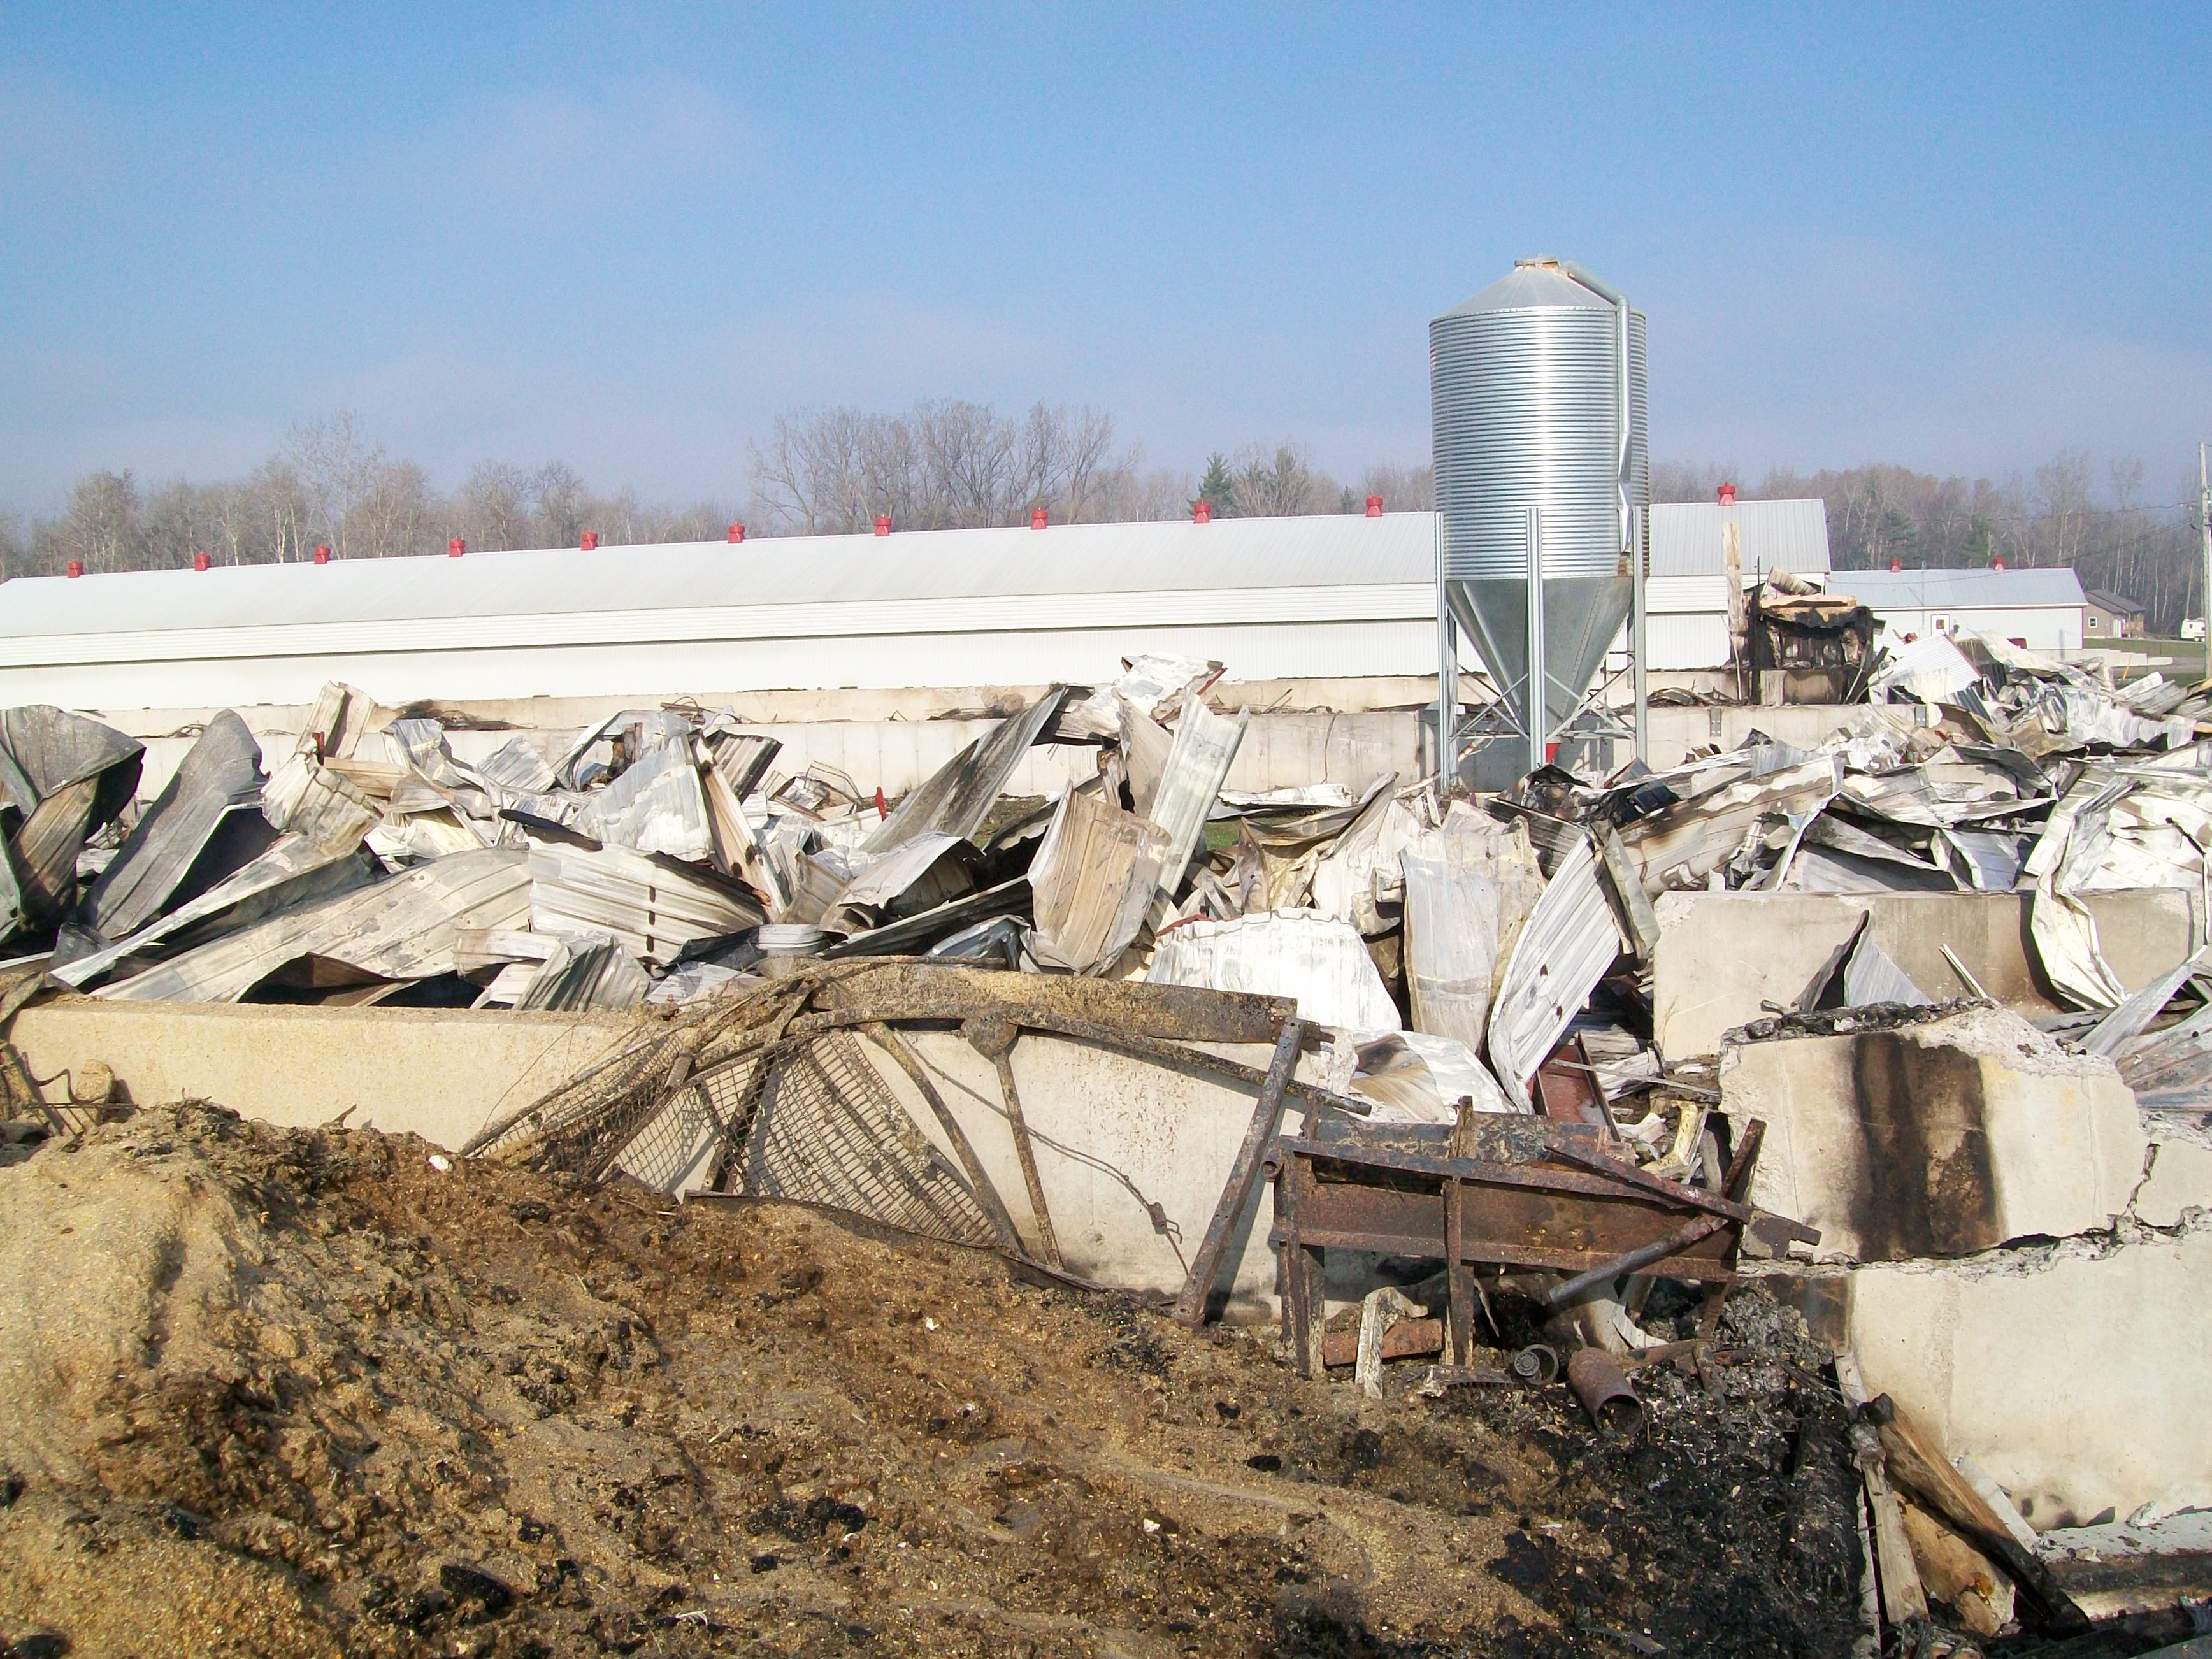 Image shows the rubble that remains from a poultry barn that has collapsed from a fire. An intact poultry barn is seen in the background.